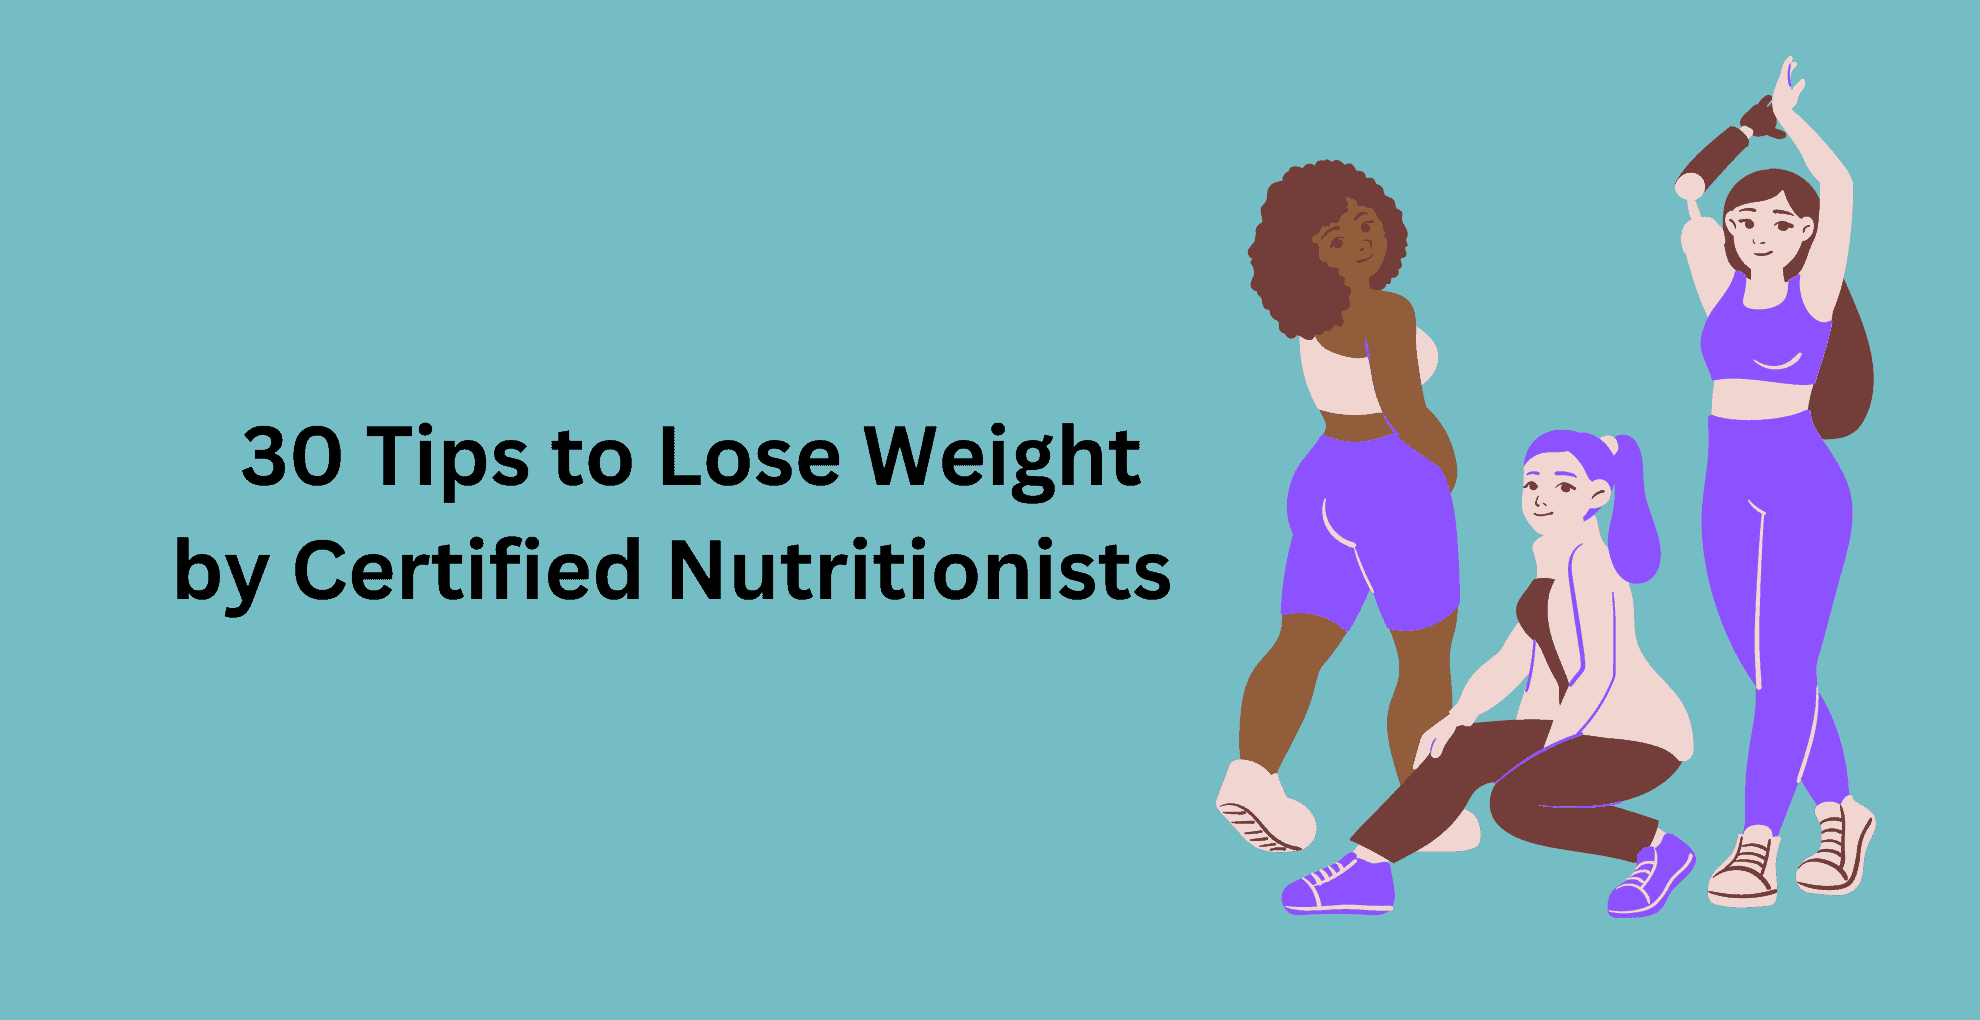 30 Tips to Lose Weight by Certified Nutritionists